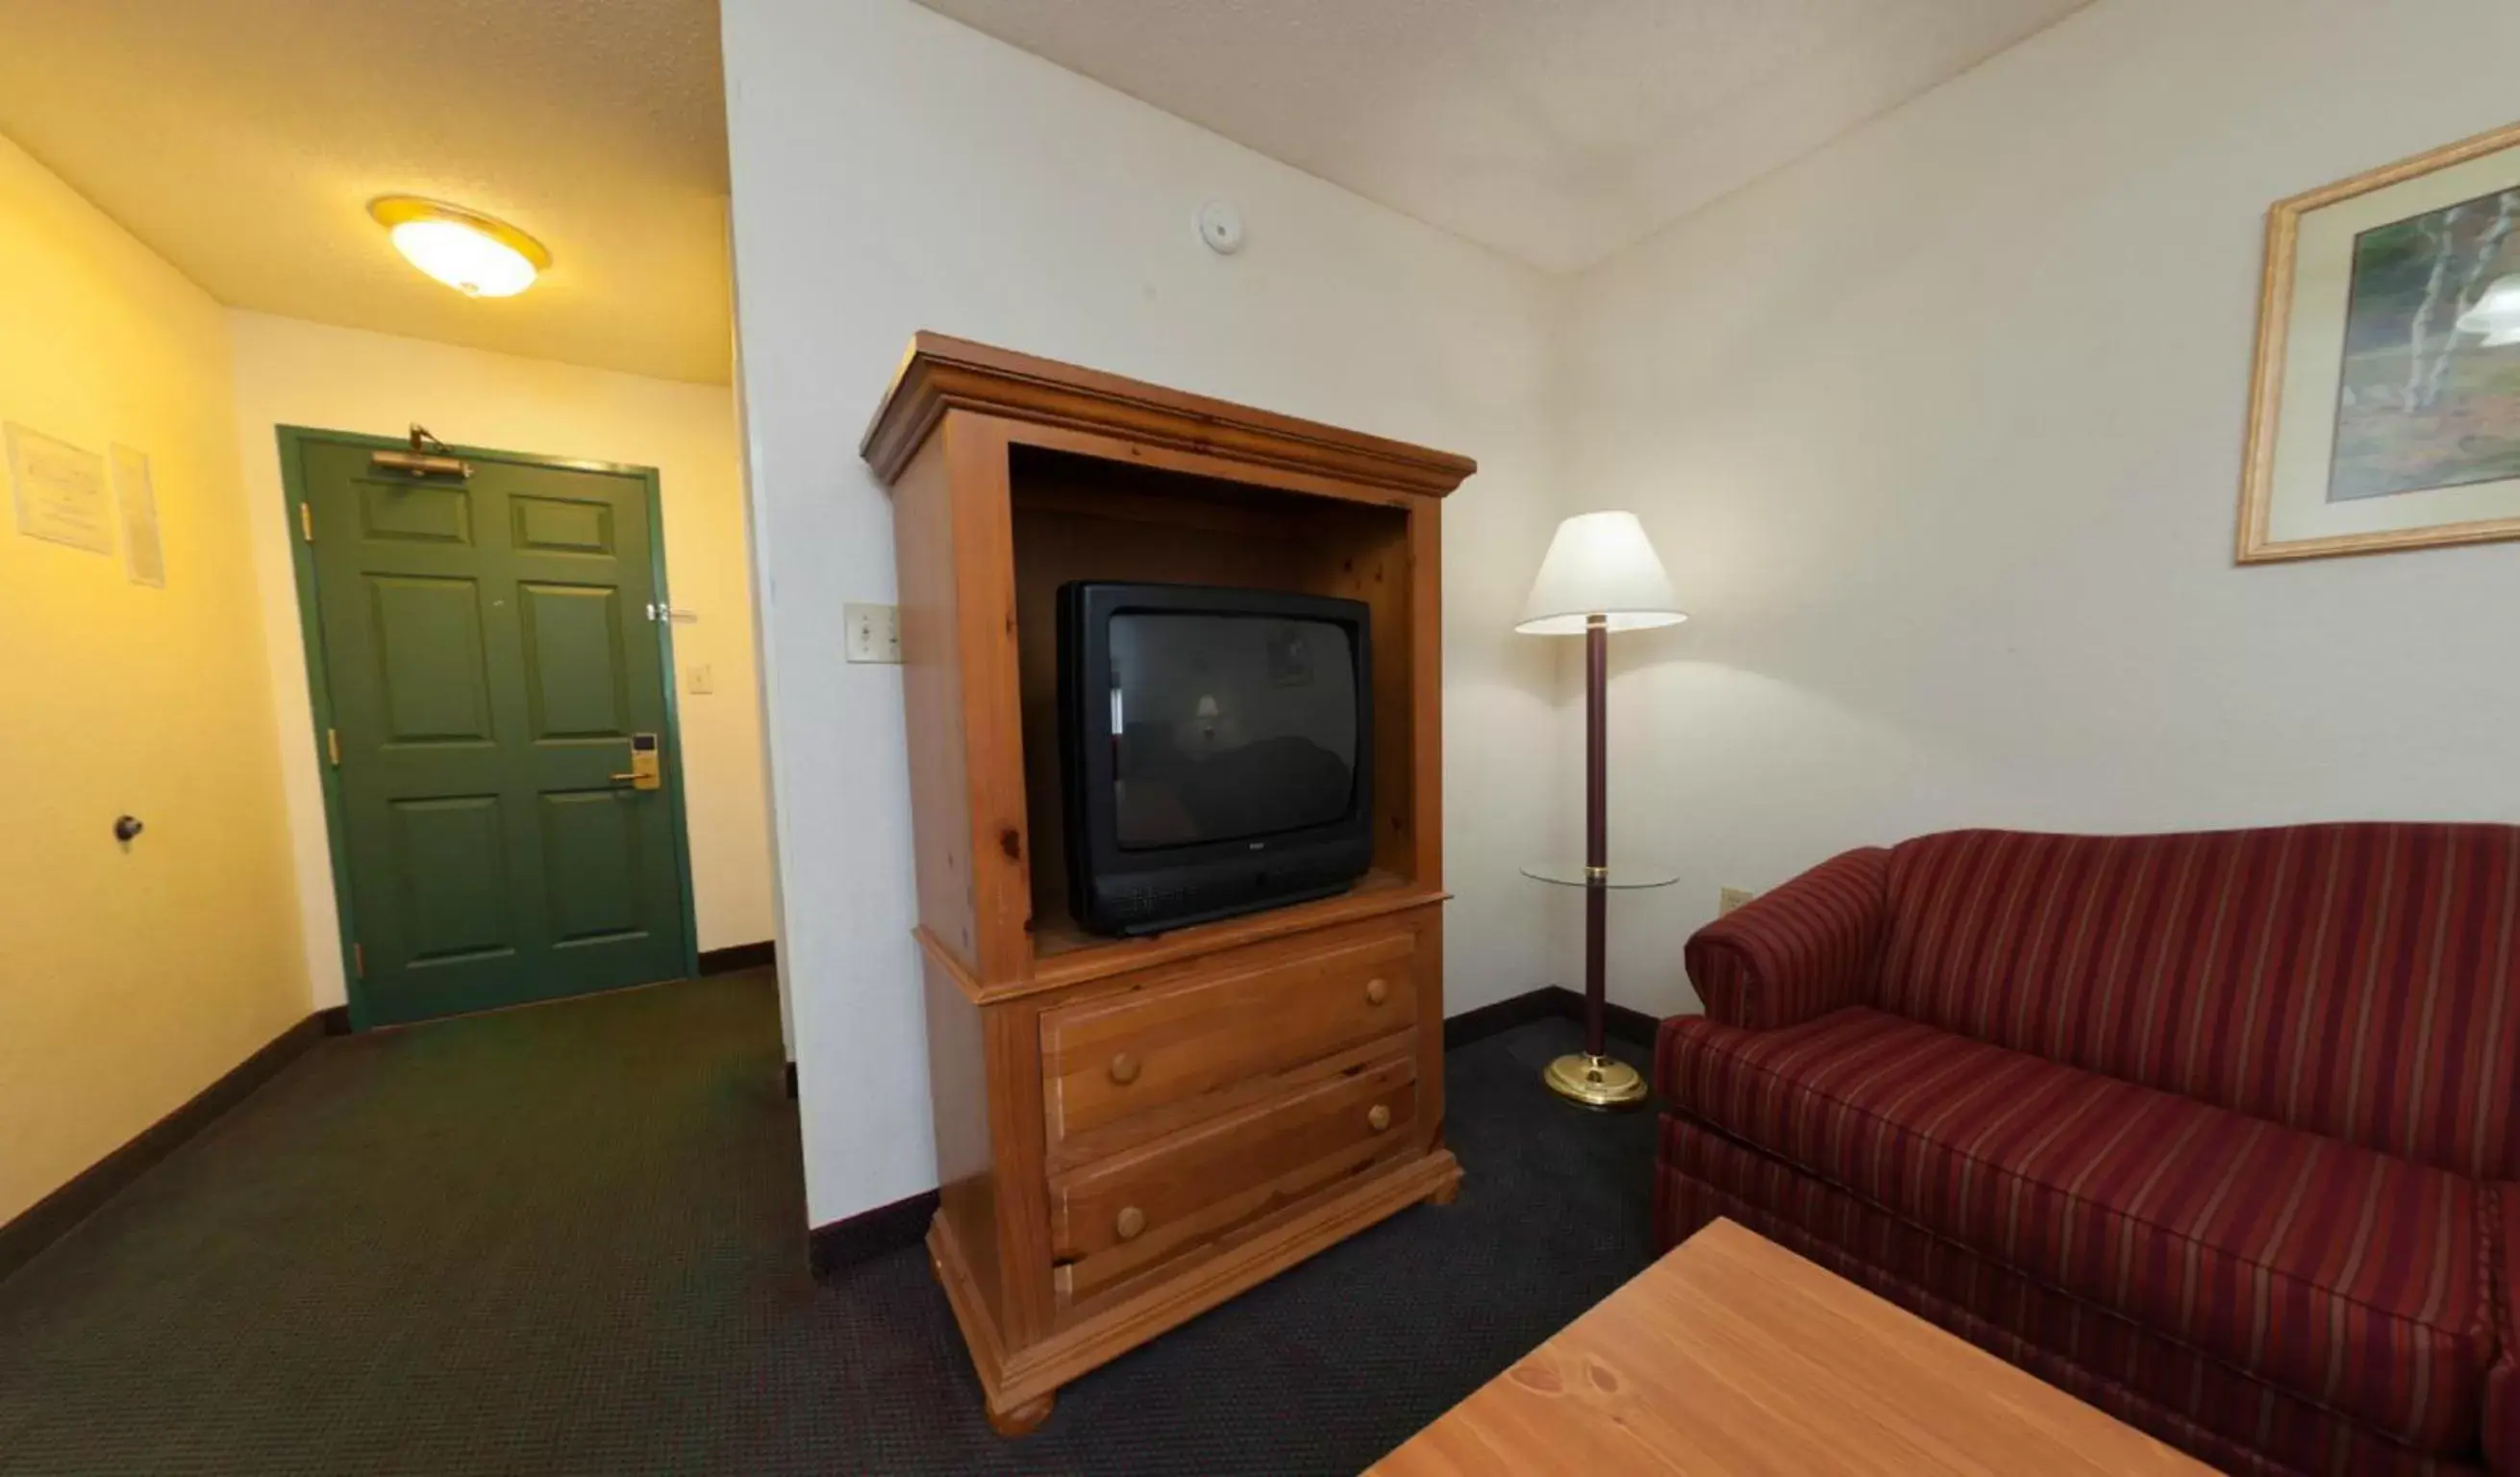 TV and multimedia, TV/Entertainment Center in Country Inn & Suites by Radisson, Indianapolis South, IN